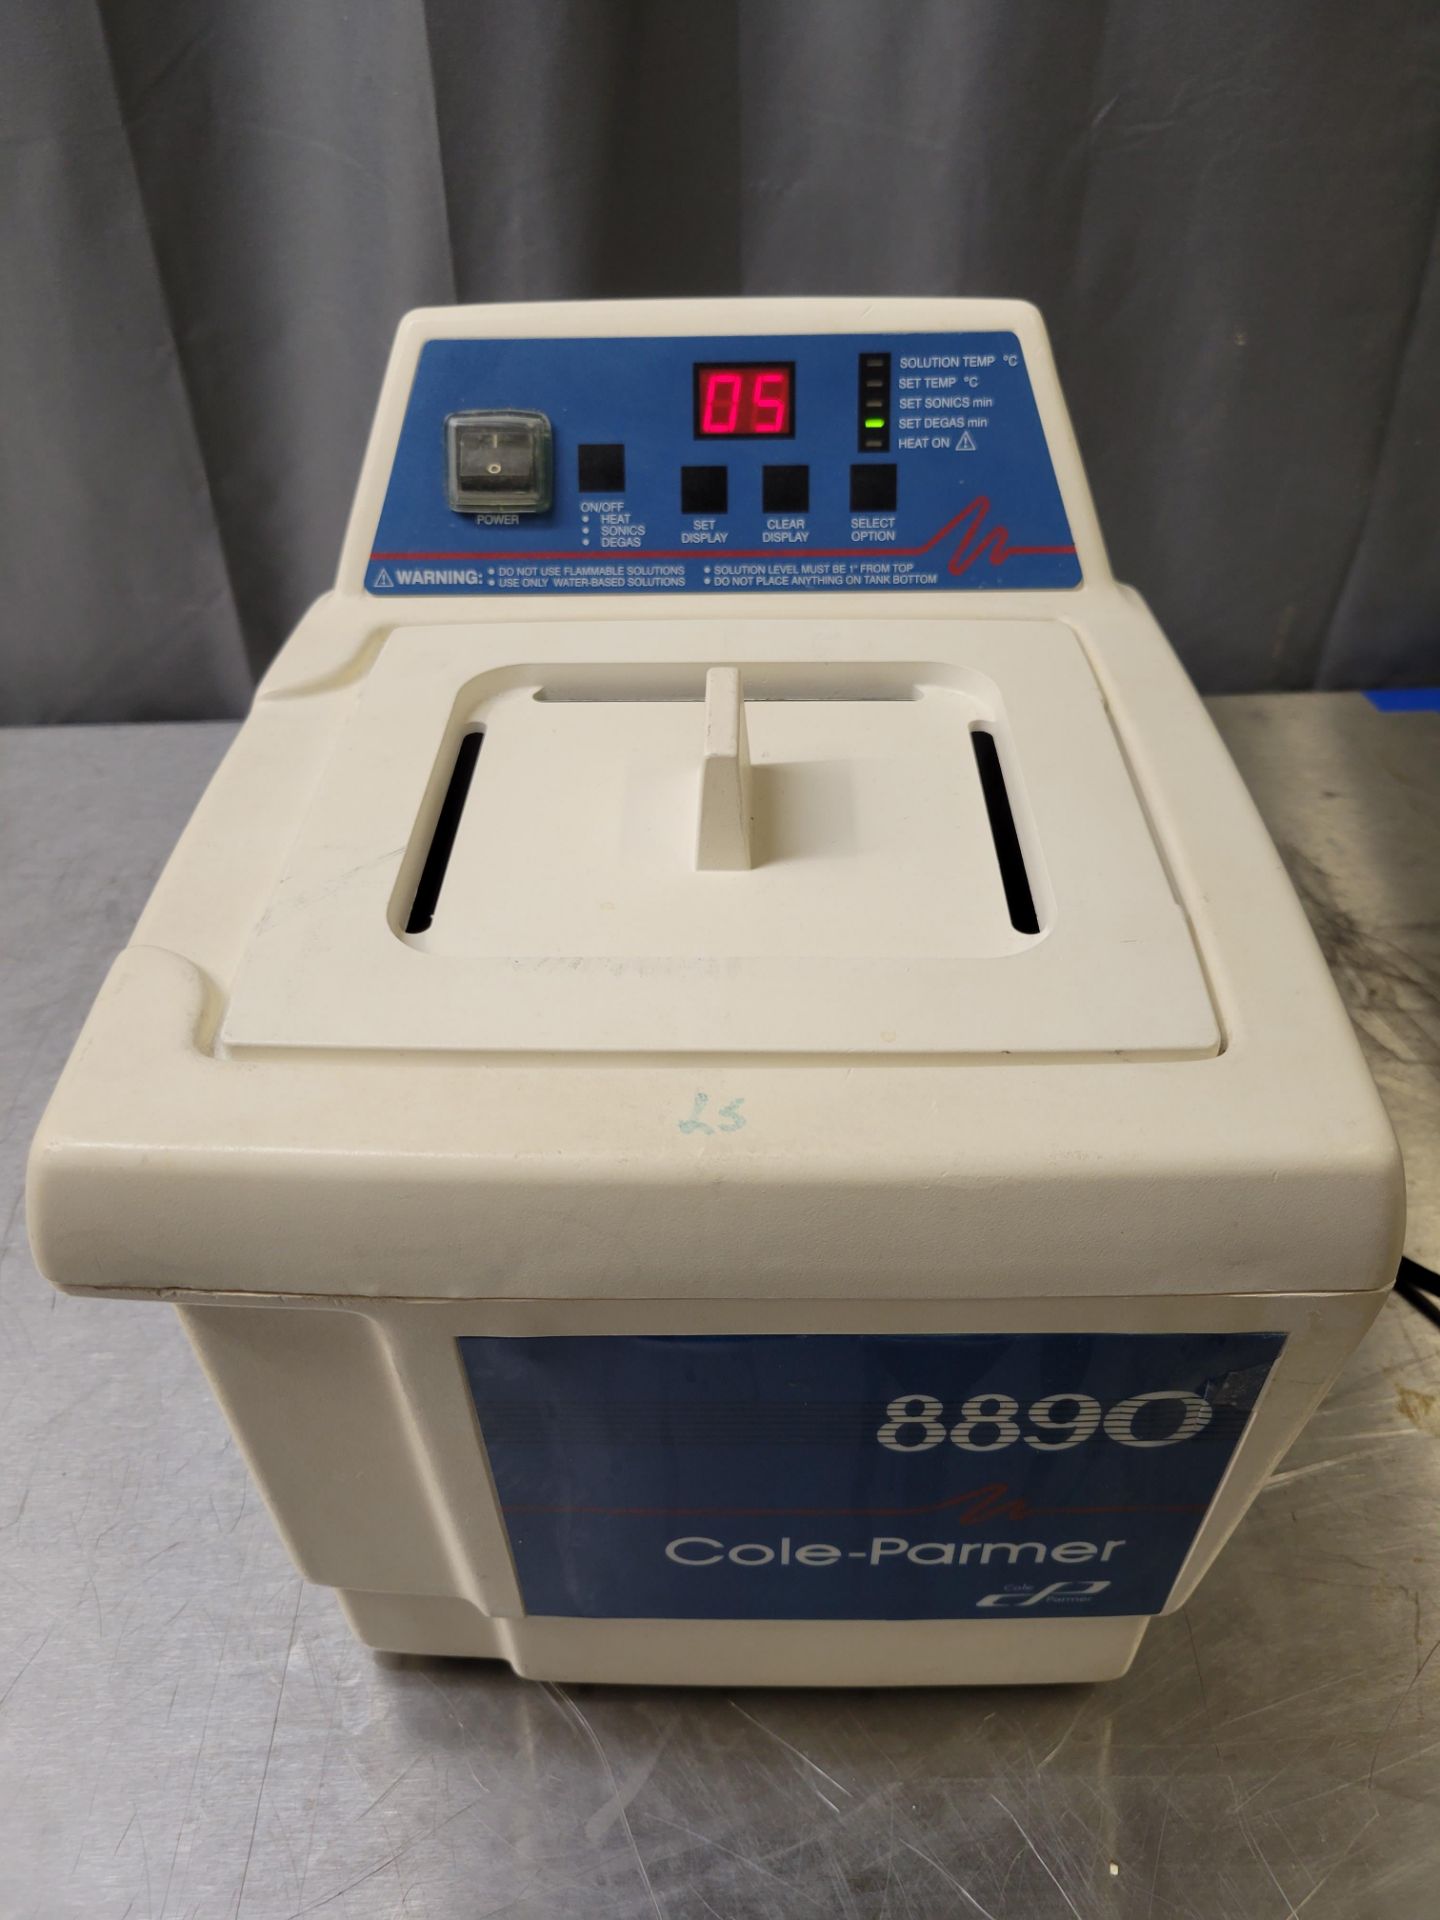 Cole-Parmer model 08890-21 Ultrasonic Cleaner sn QAC120617230D Bldg Loc: 2-3 or 4 This Lot Ships - Image 2 of 5